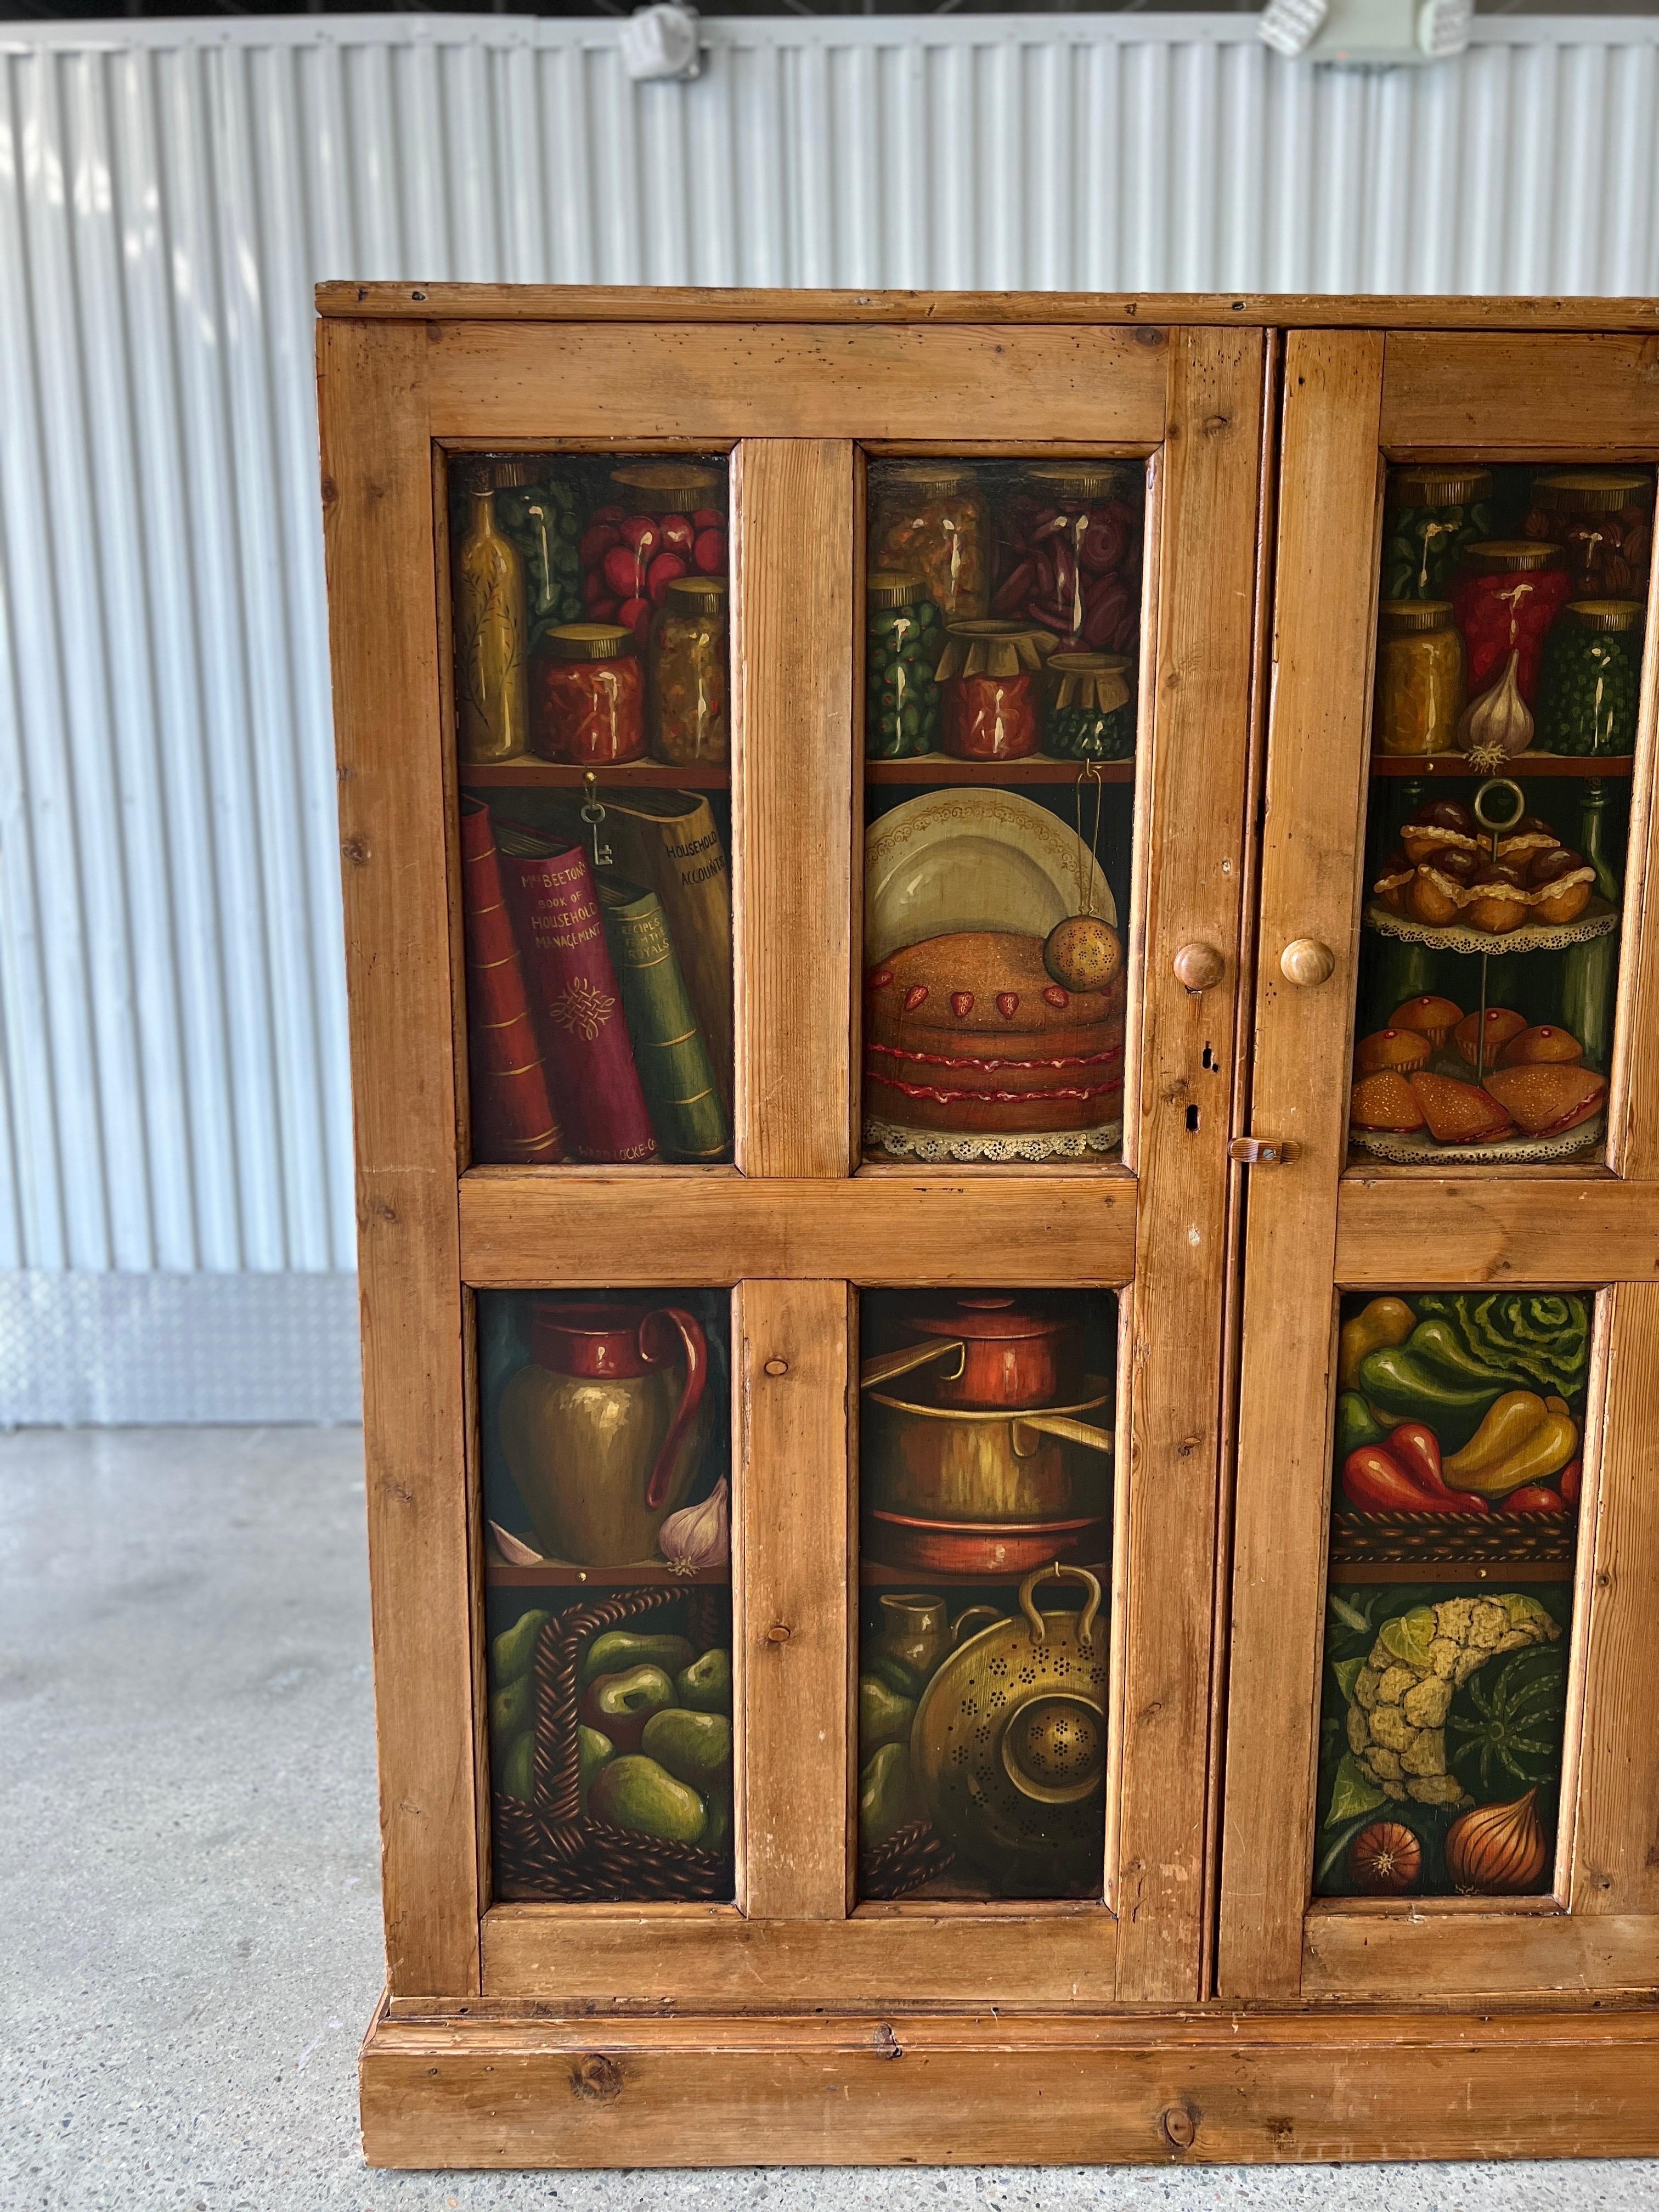 English, 19th century.

A beautiful antique English pine cupboard cabinet which has 8 individually painted panels to the exterior showcasing fruit, vegetables, books, wine bottles, books and cooking pots. The Trompe L'oeil paintings are done very